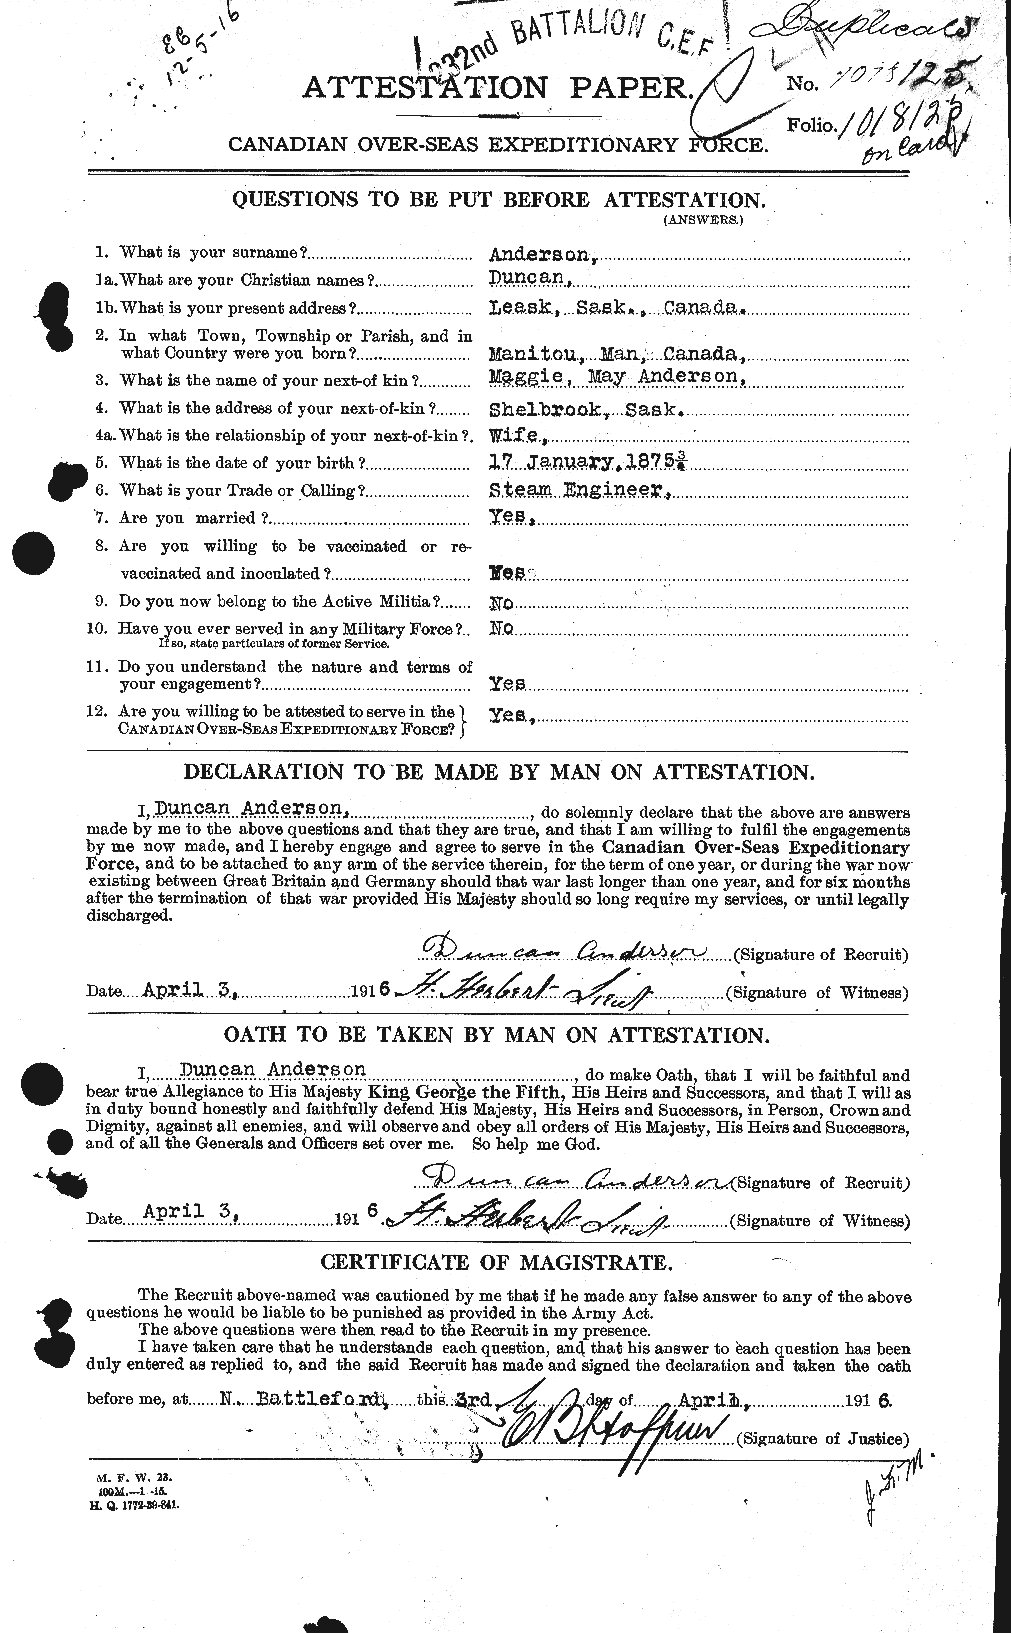 Personnel Records of the First World War - CEF 209973a